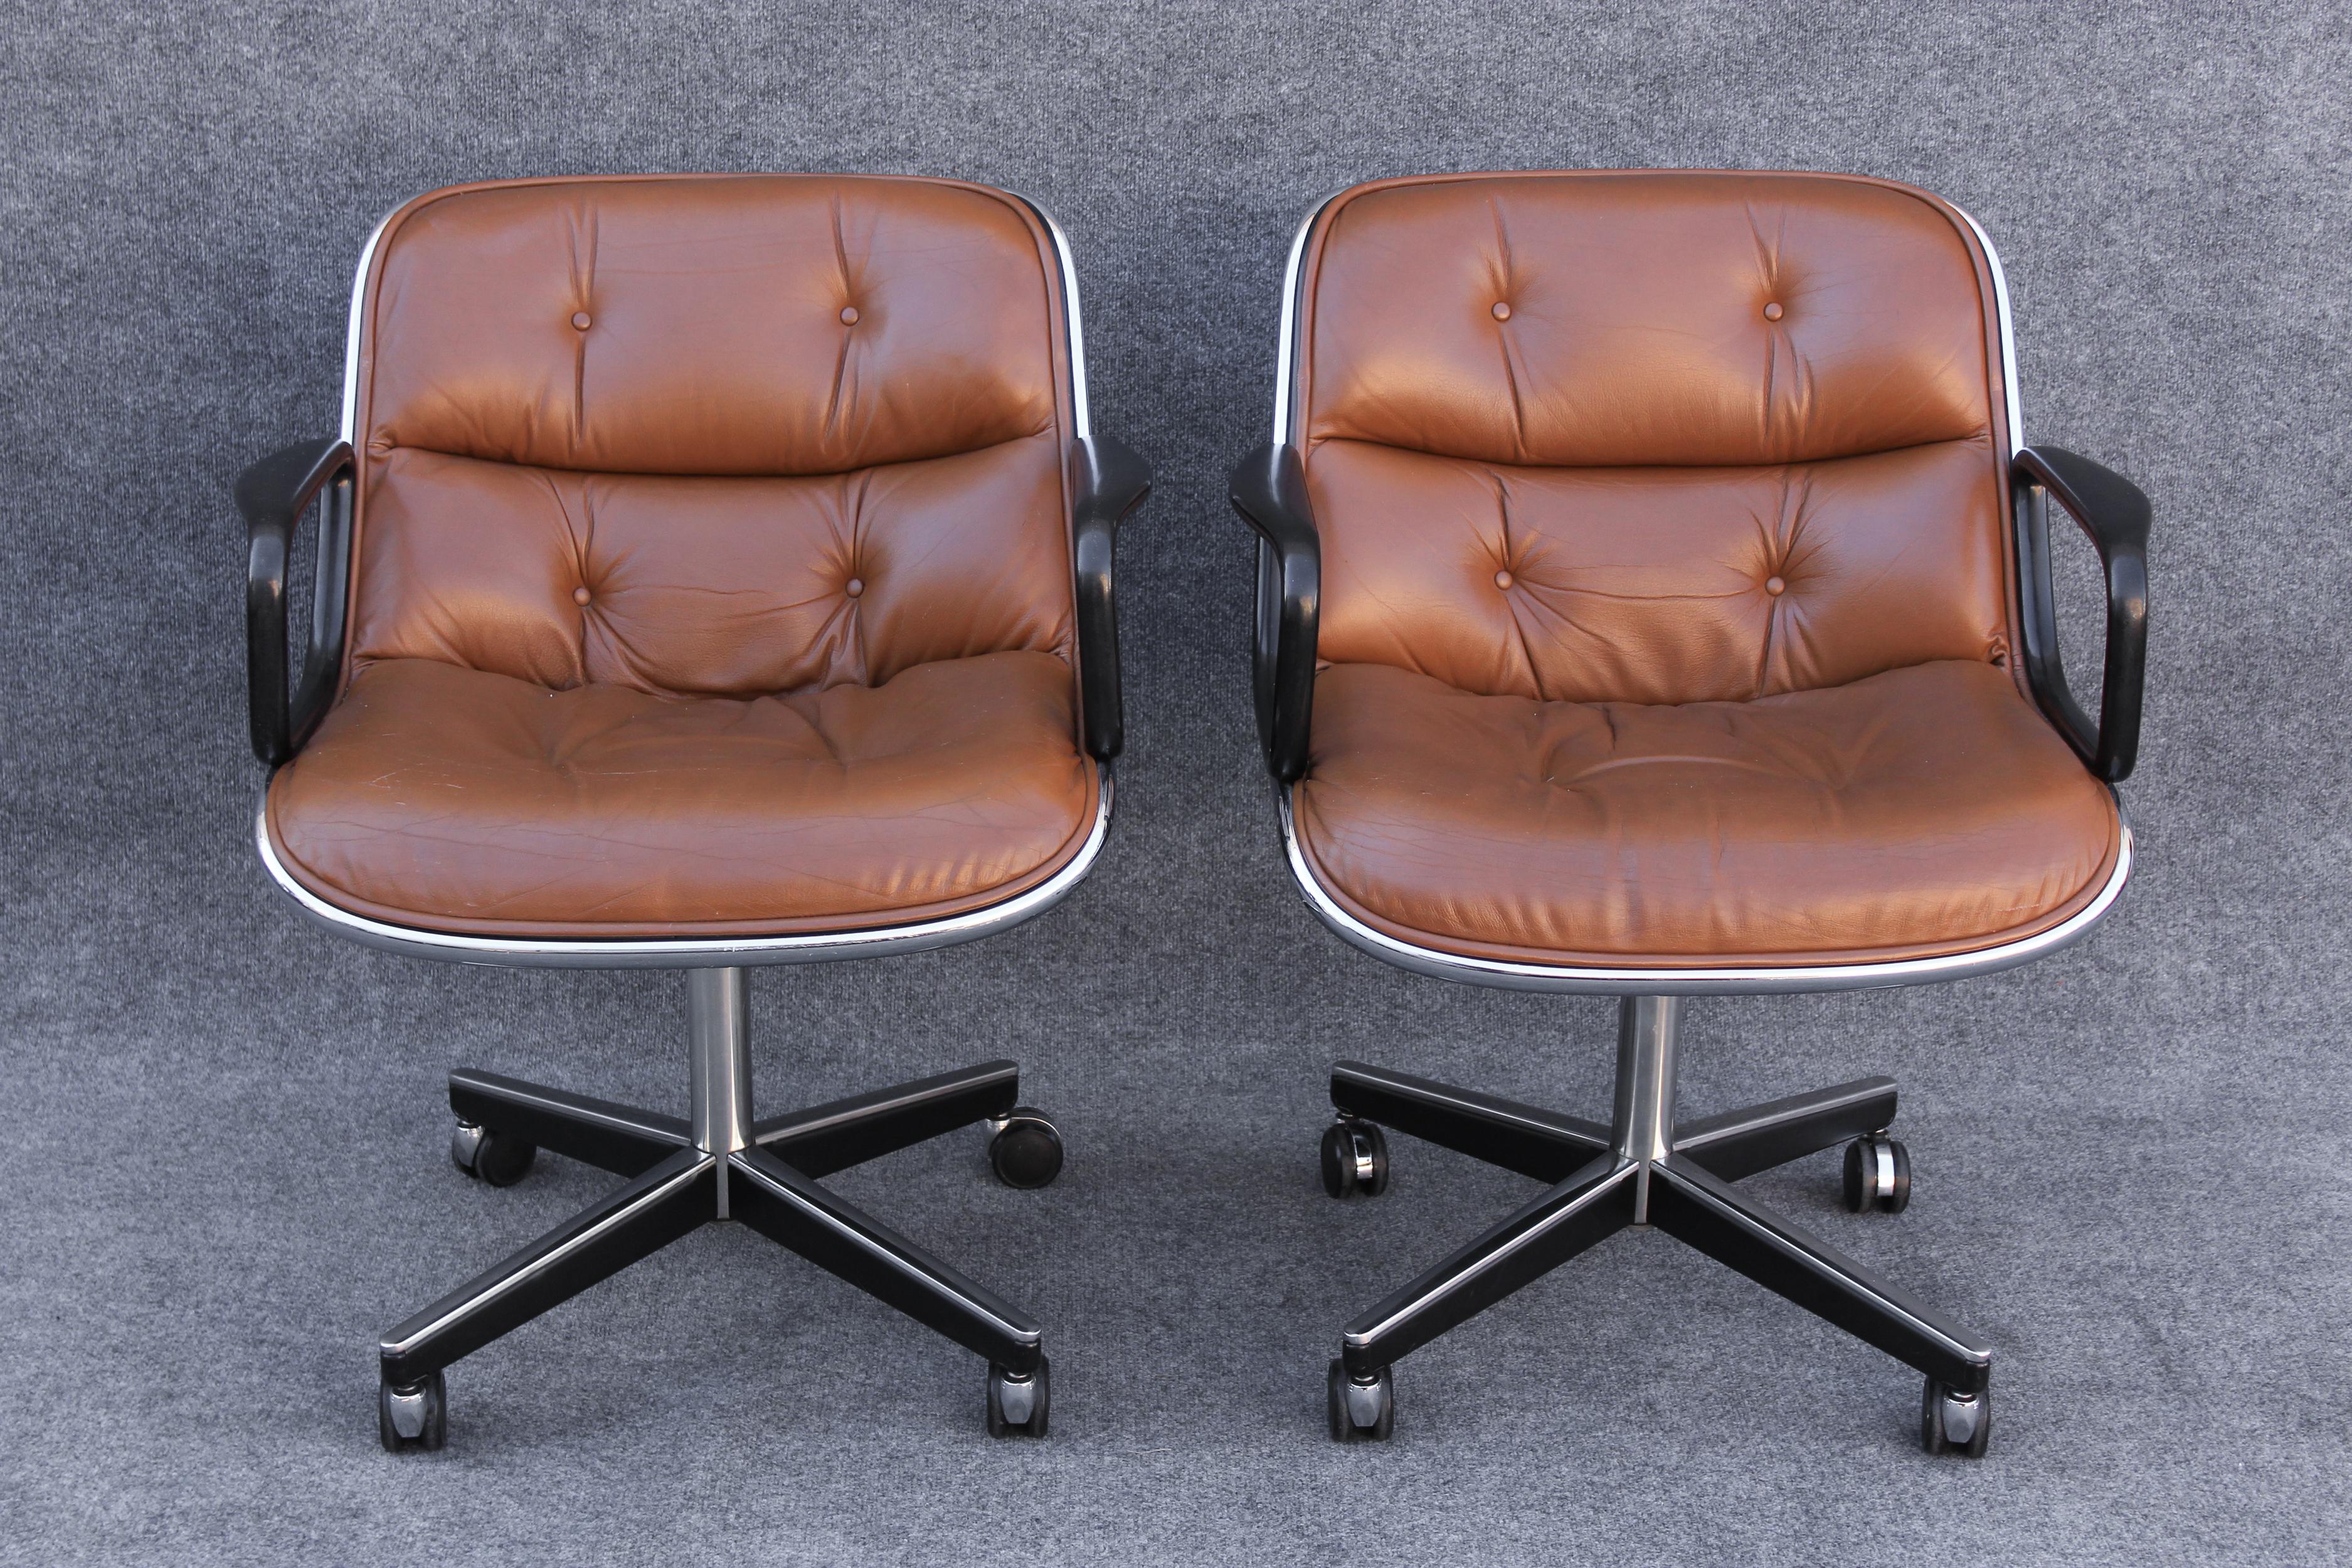 Produced by Knoll, these chairs were designed by Charles Pollock. Dated by the address on the label, these were made in the 1960s. This pair features dark brown leather and a chromed steel exterior, set on a 4 star base of rectangular chrome and